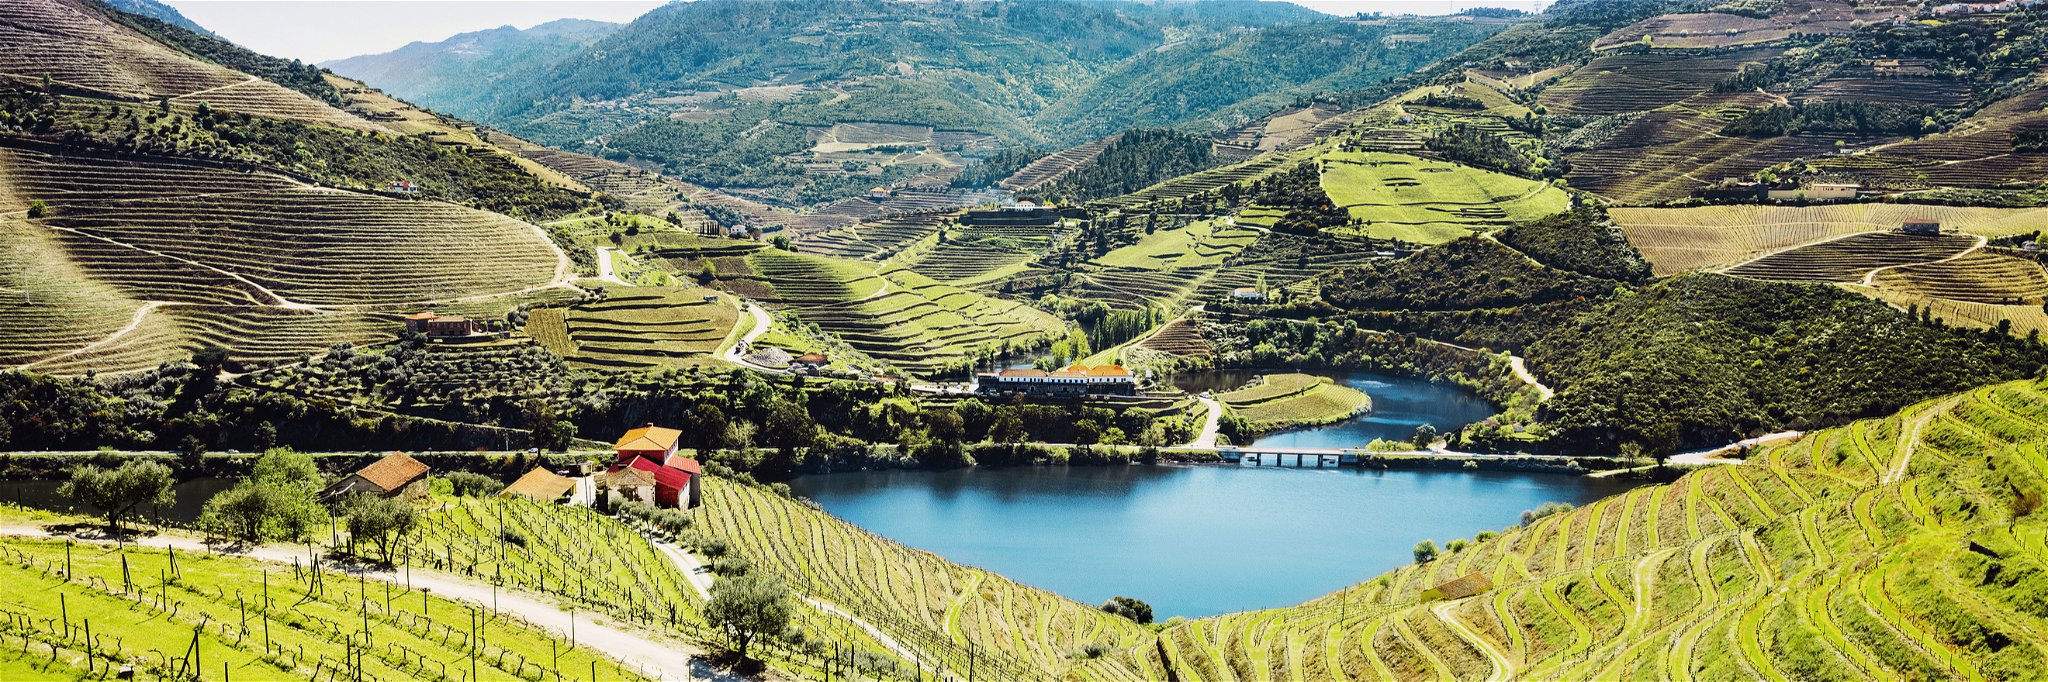 Douro Valley&nbsp;in Northern Portugal is one of the oldest wine regions in the world